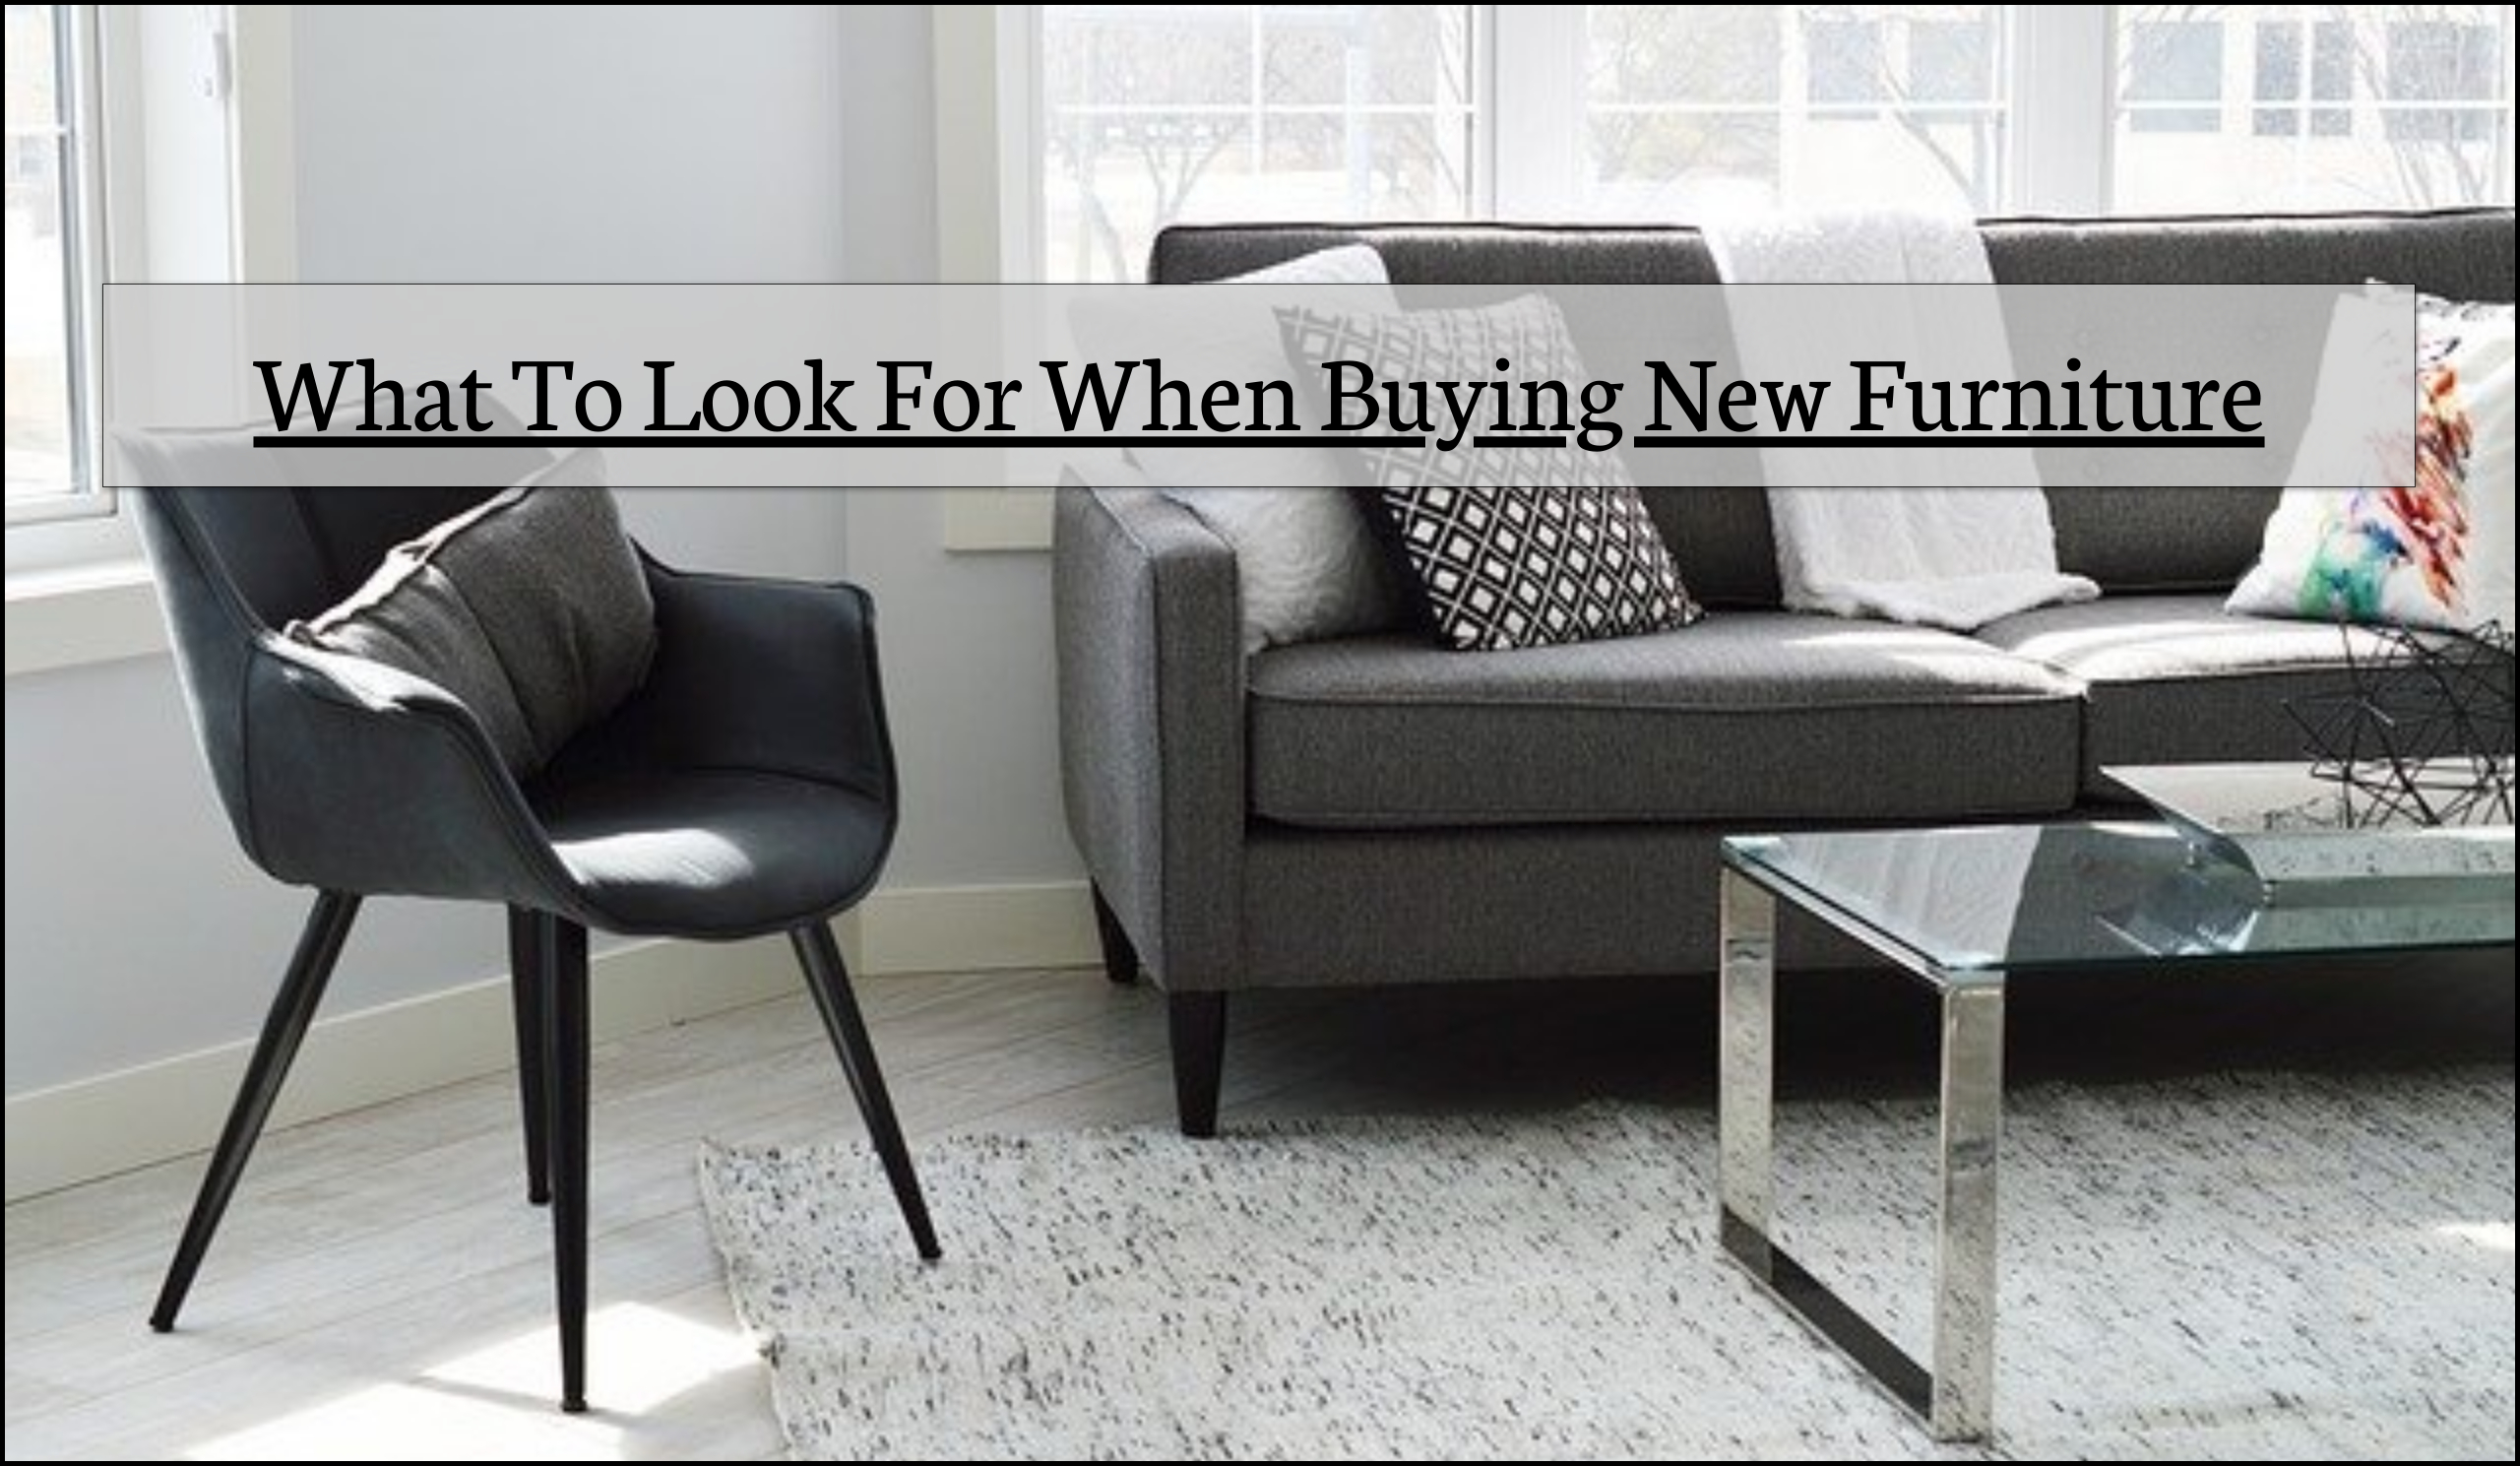 What To Look For When Buying New Furniture – May 2021-Max-Quality